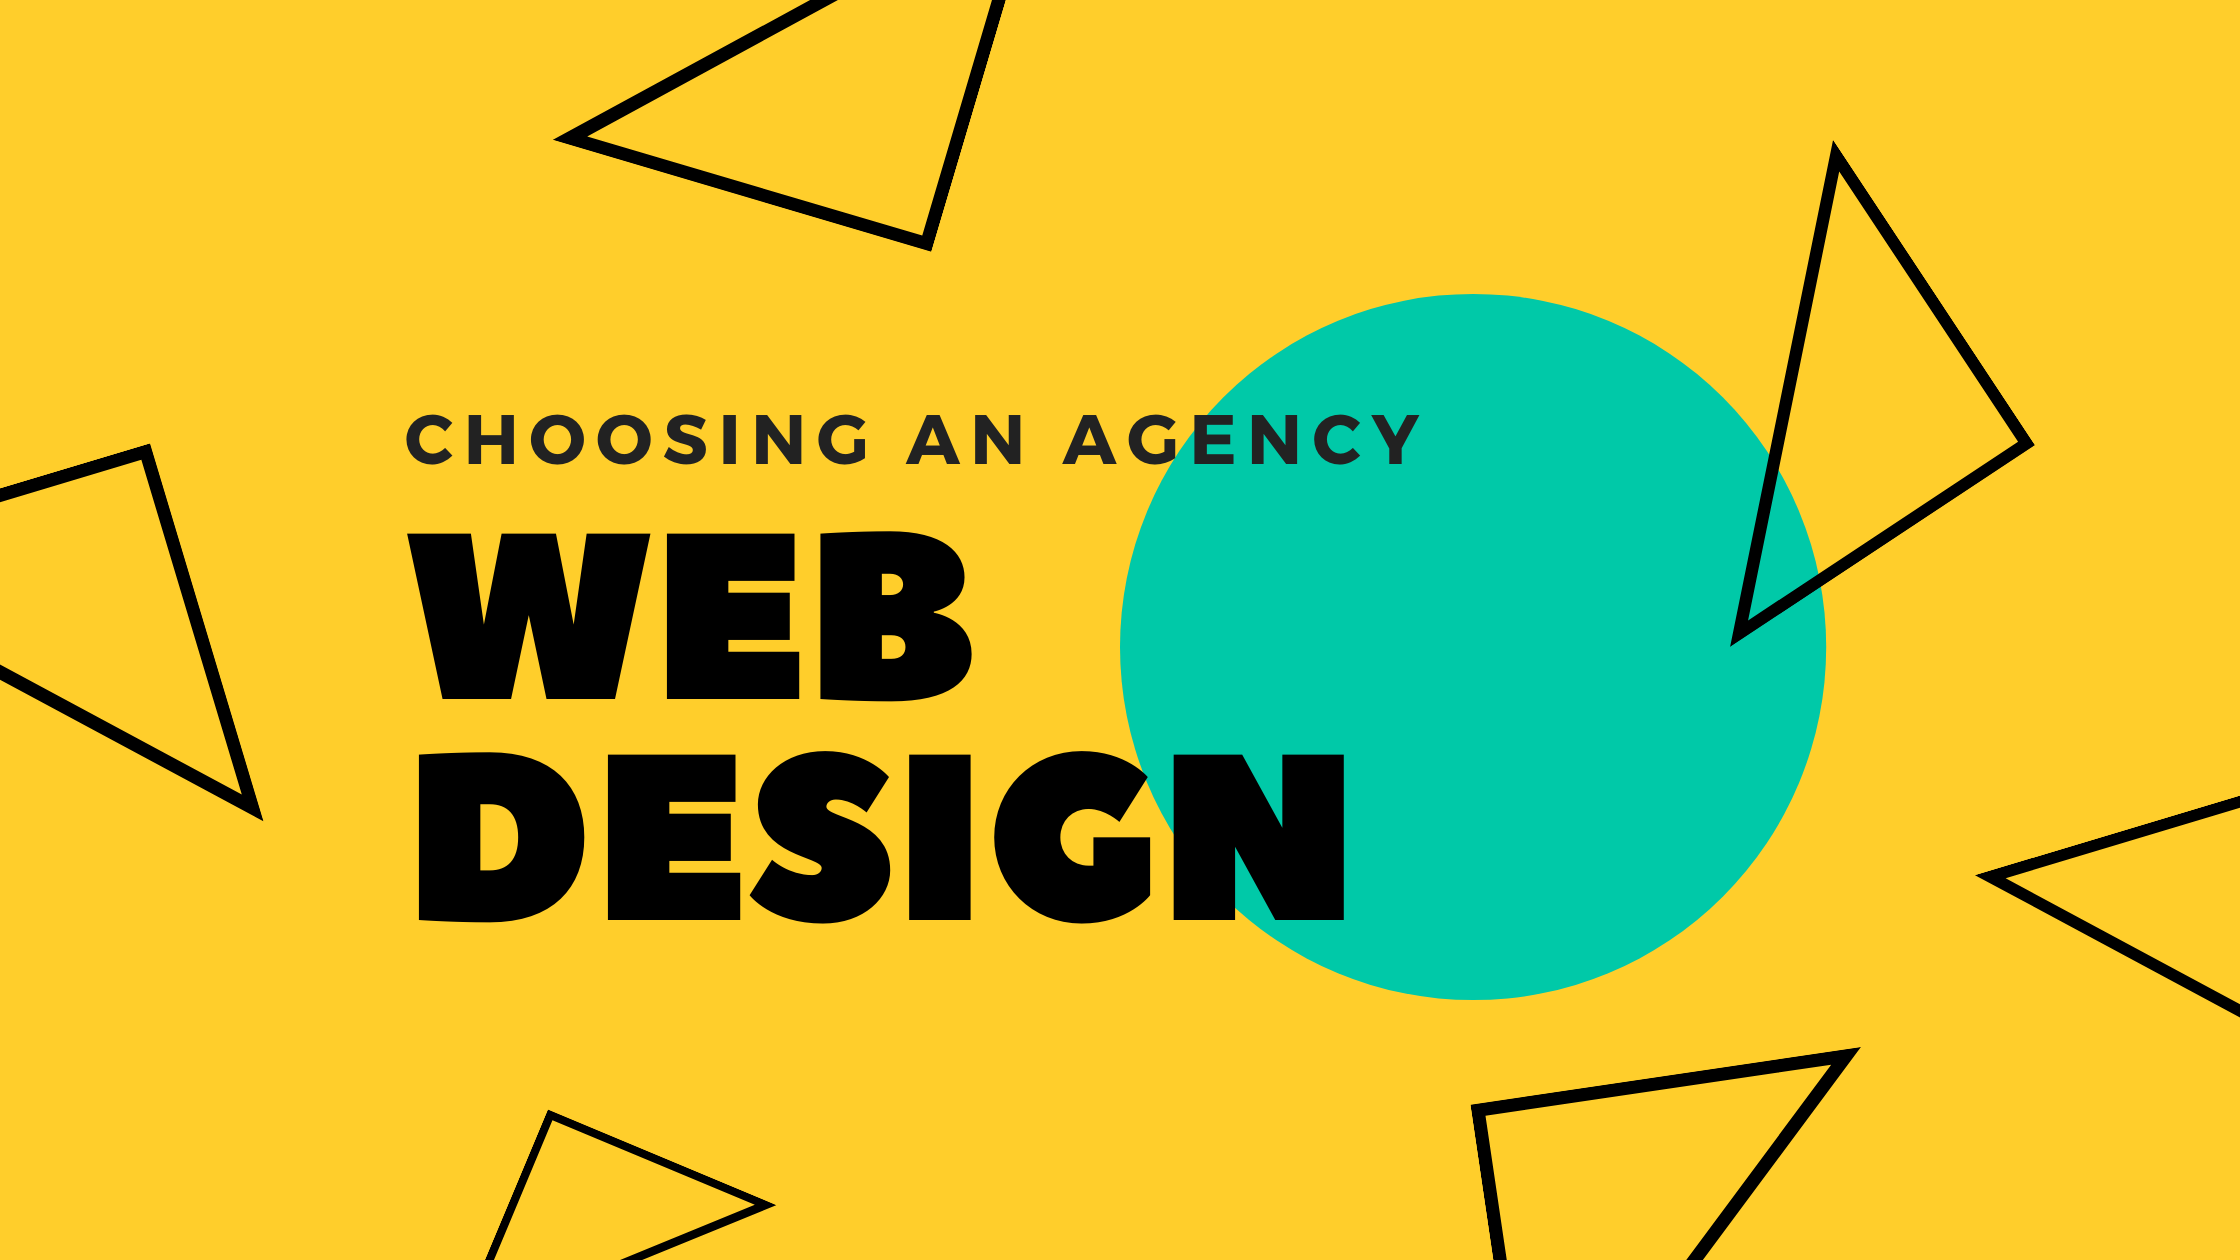 How to Choose an Affordable Web Design Company